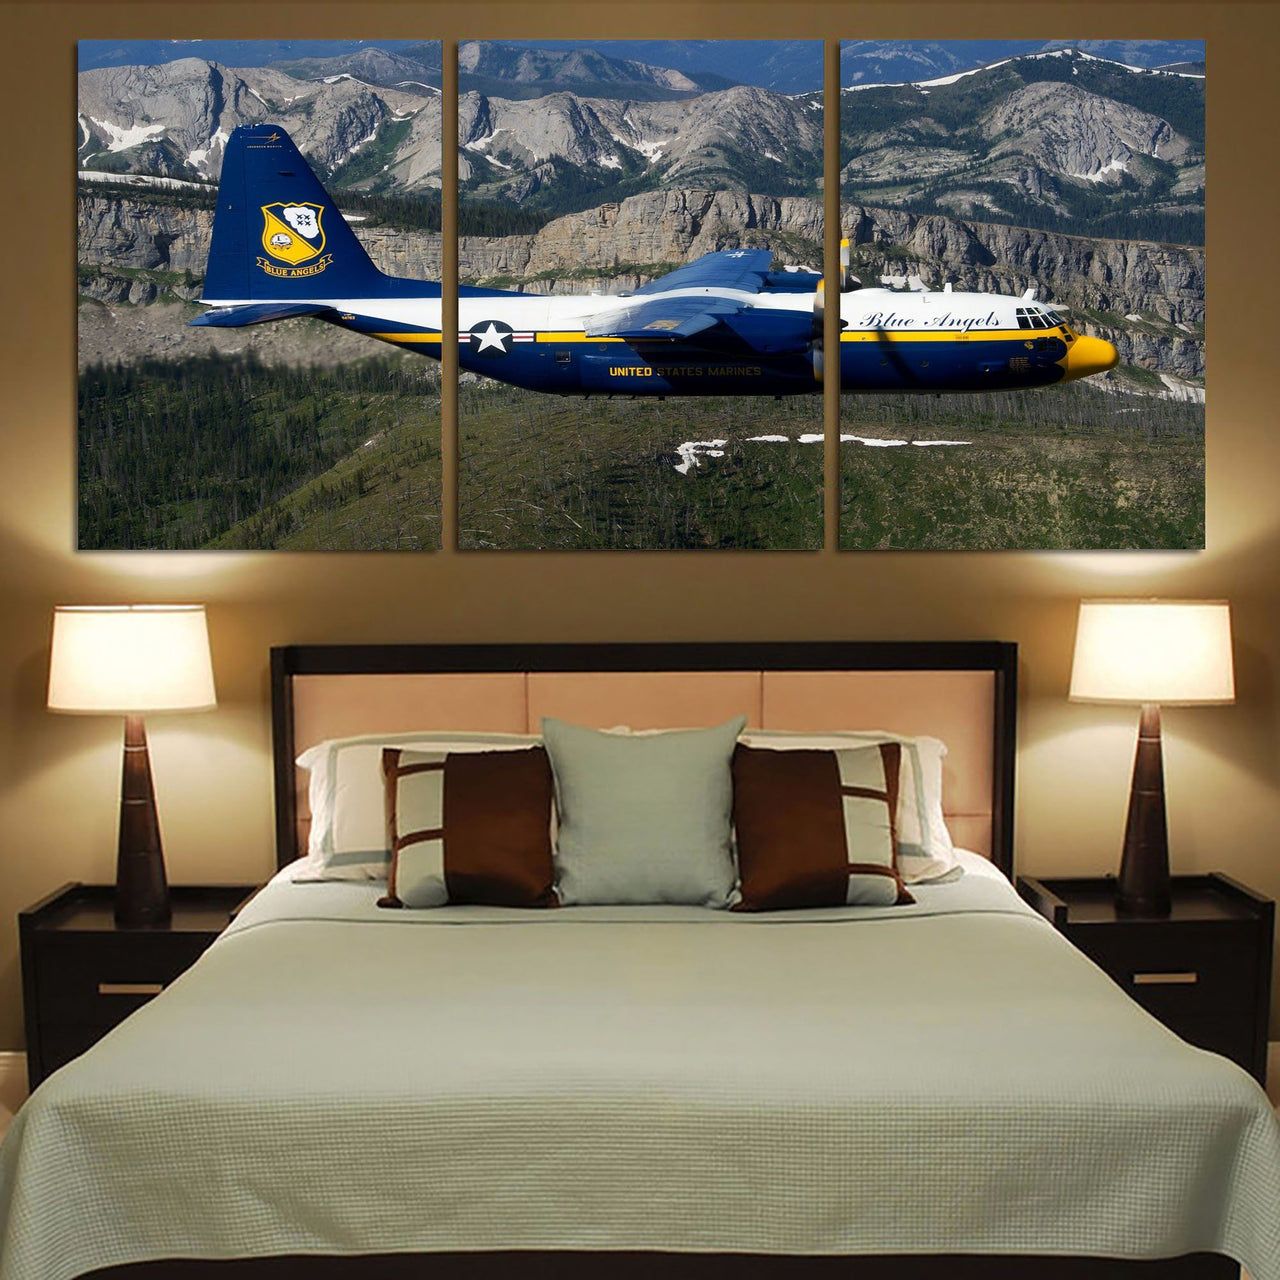 Amazing View with Blue Angels Aircraft Printed Canvas Posters (3 Pieces) Aviation Shop 